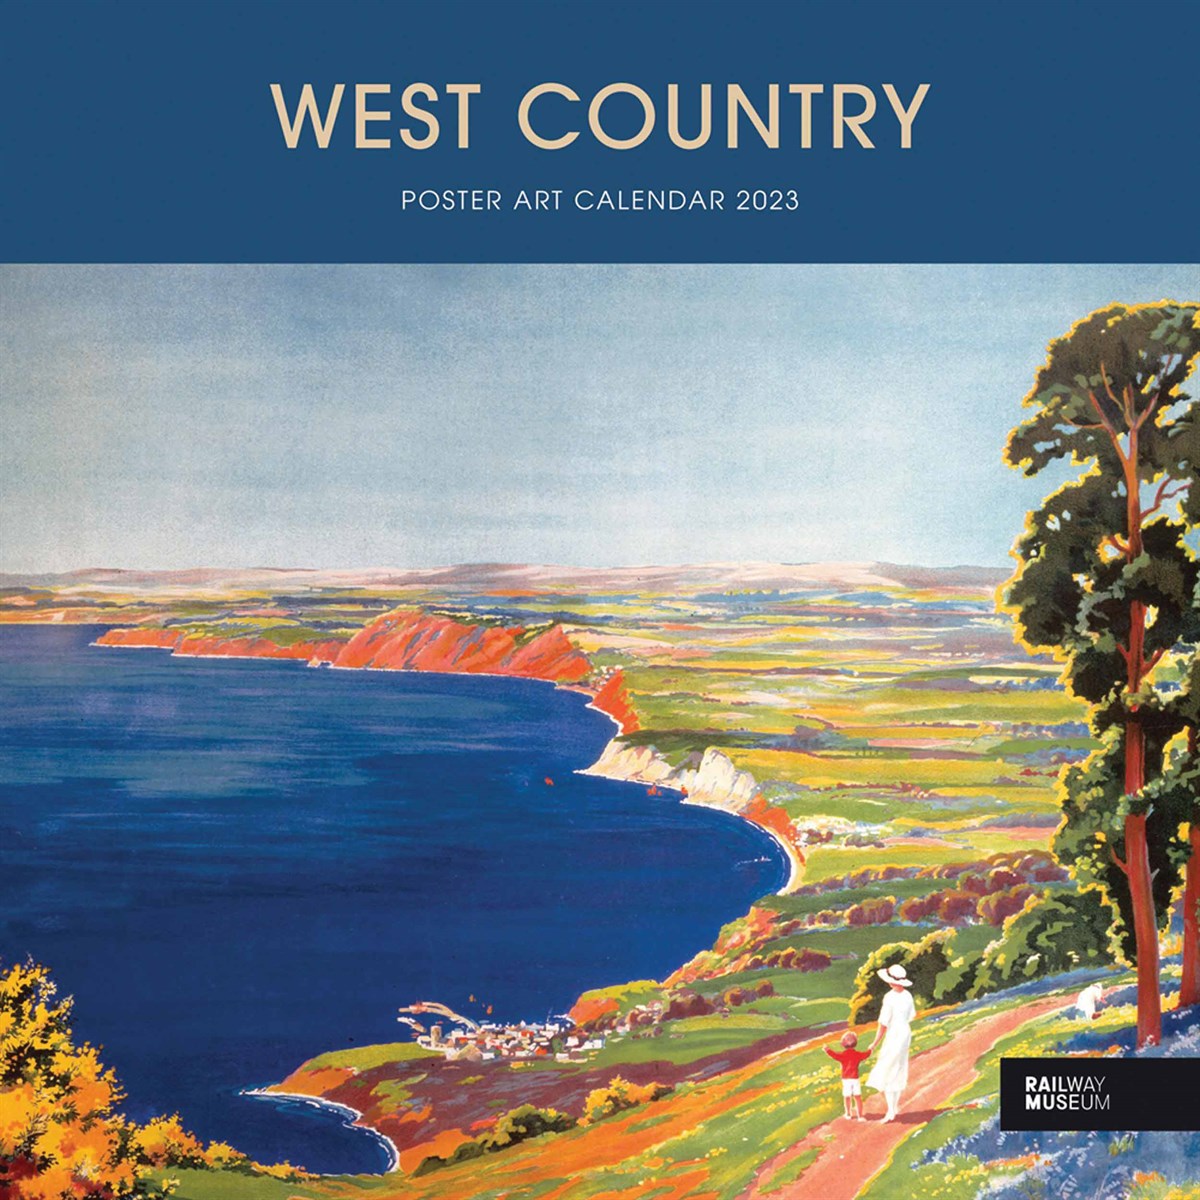 National Railway Museum, West Country Poster Art 2023 Calendars